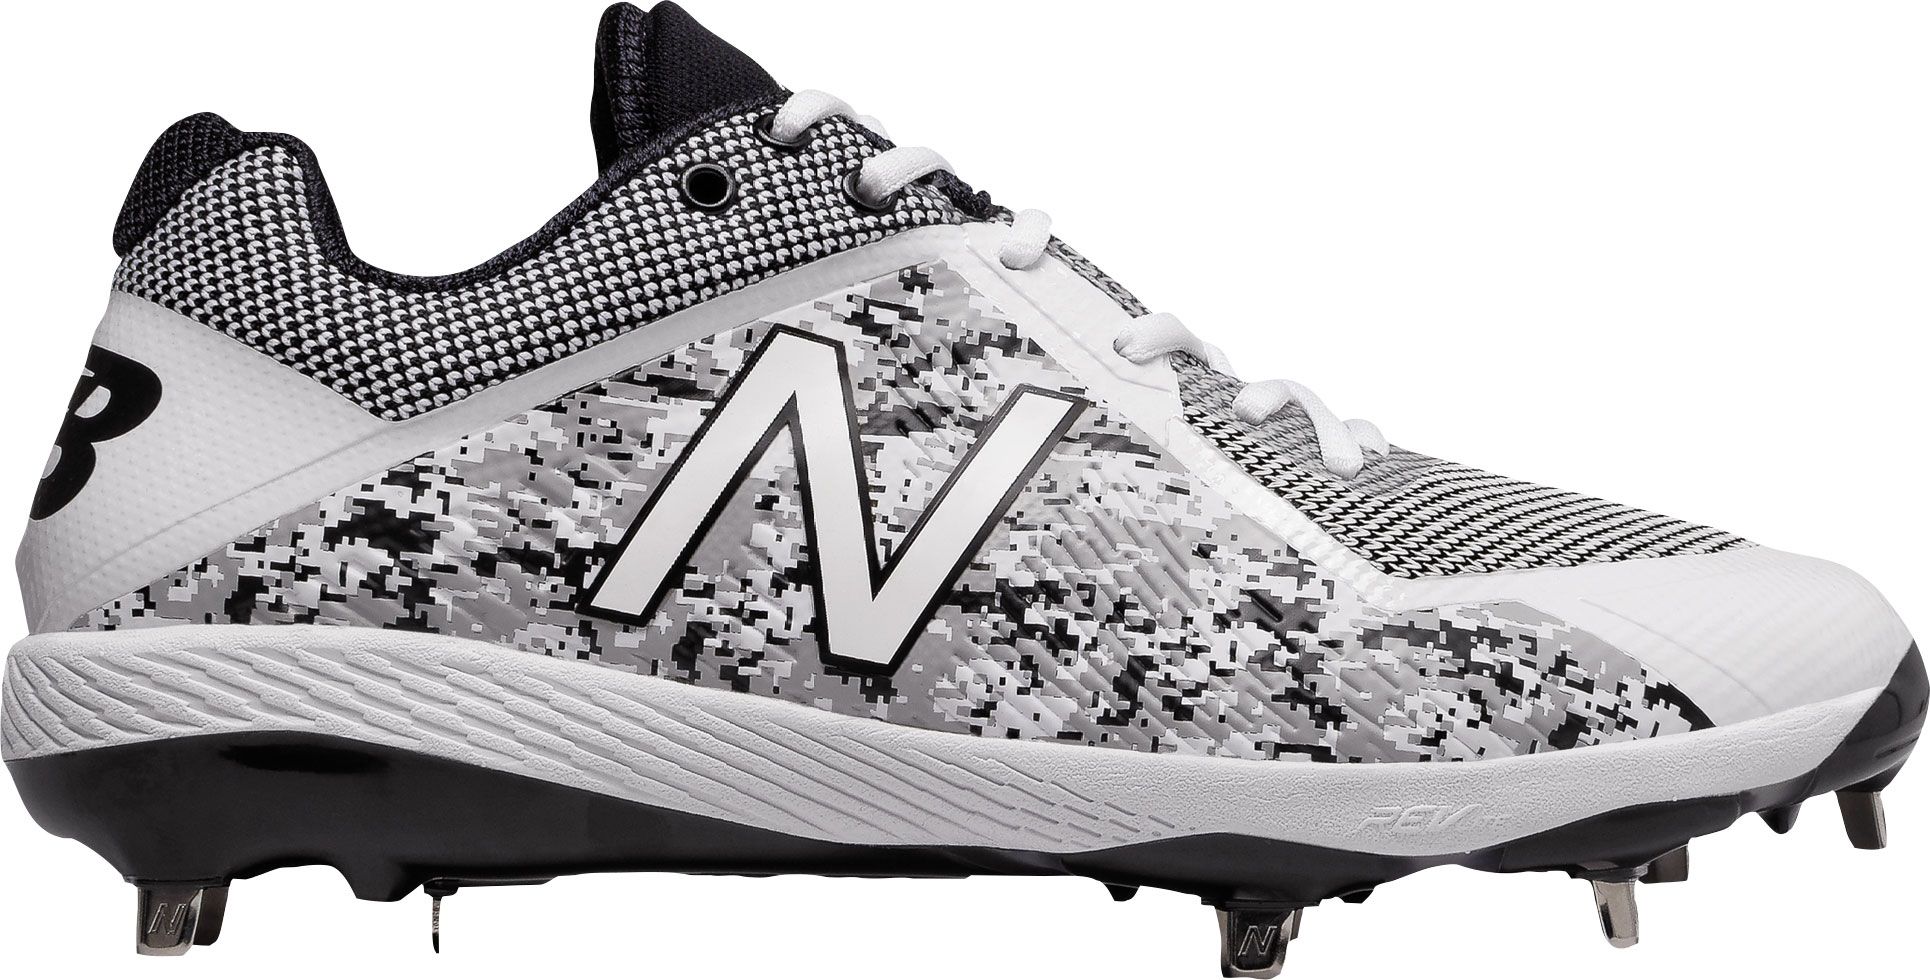 dustin pedroia new balance cleats